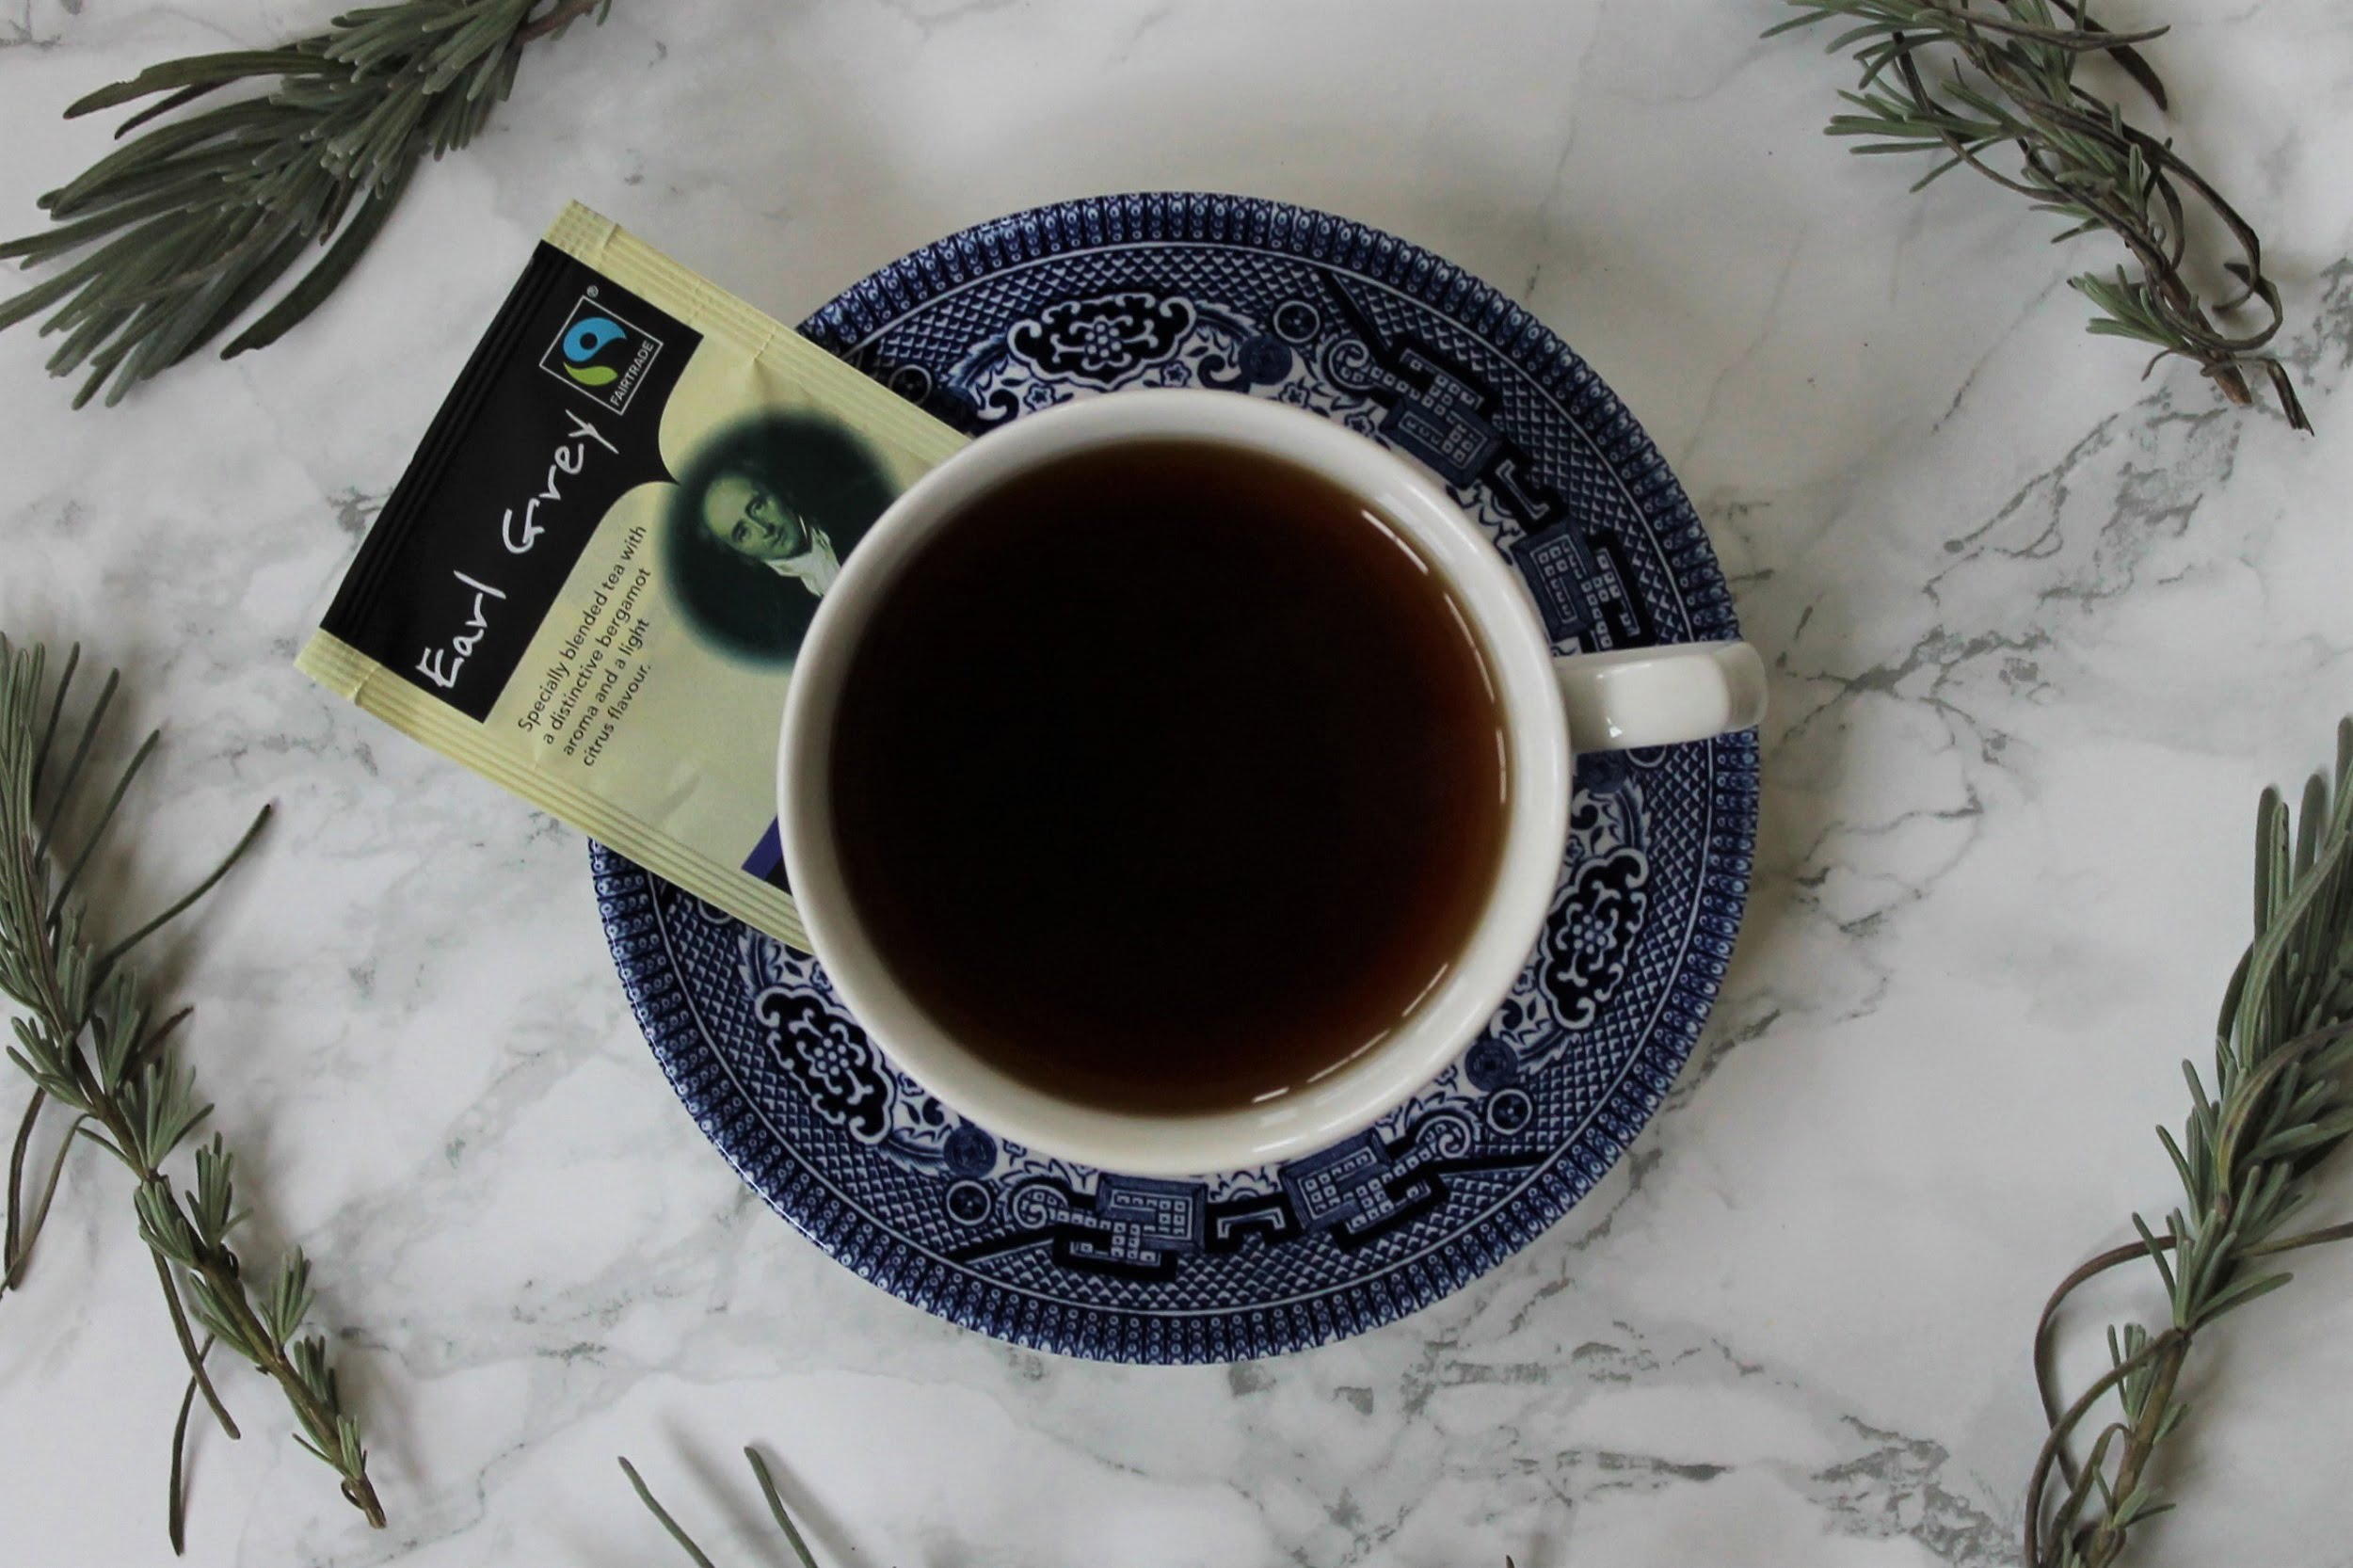 classic earl grey black tea from above